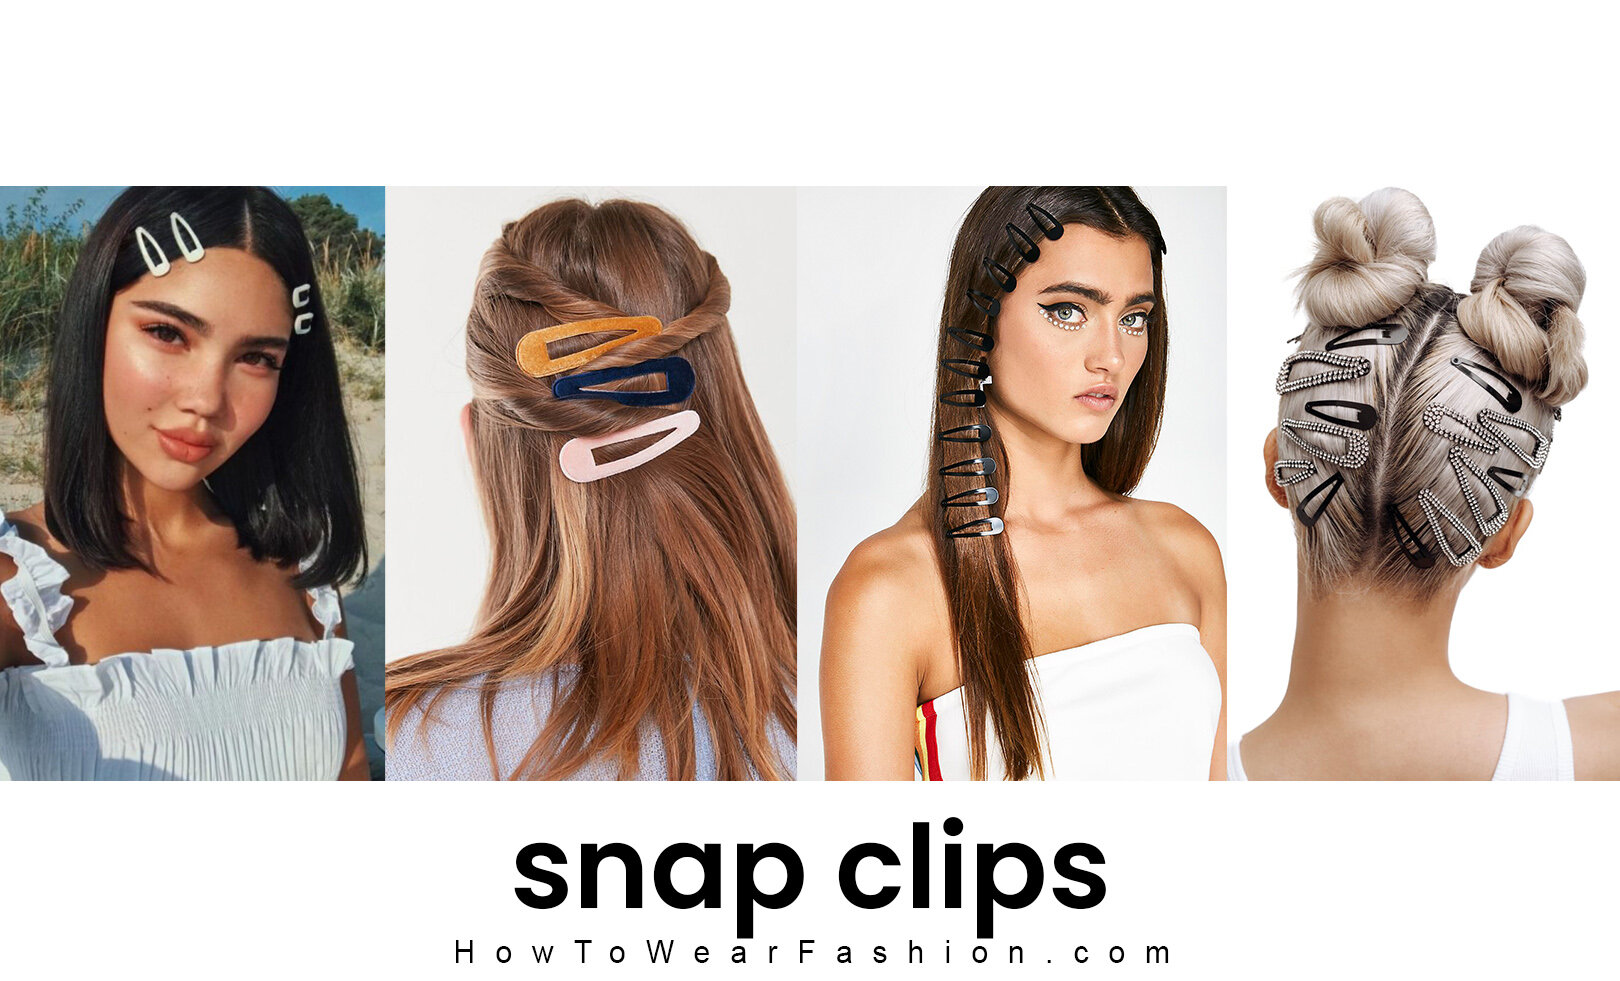 Trend Snap clips  HOWTOWEAR Fashion